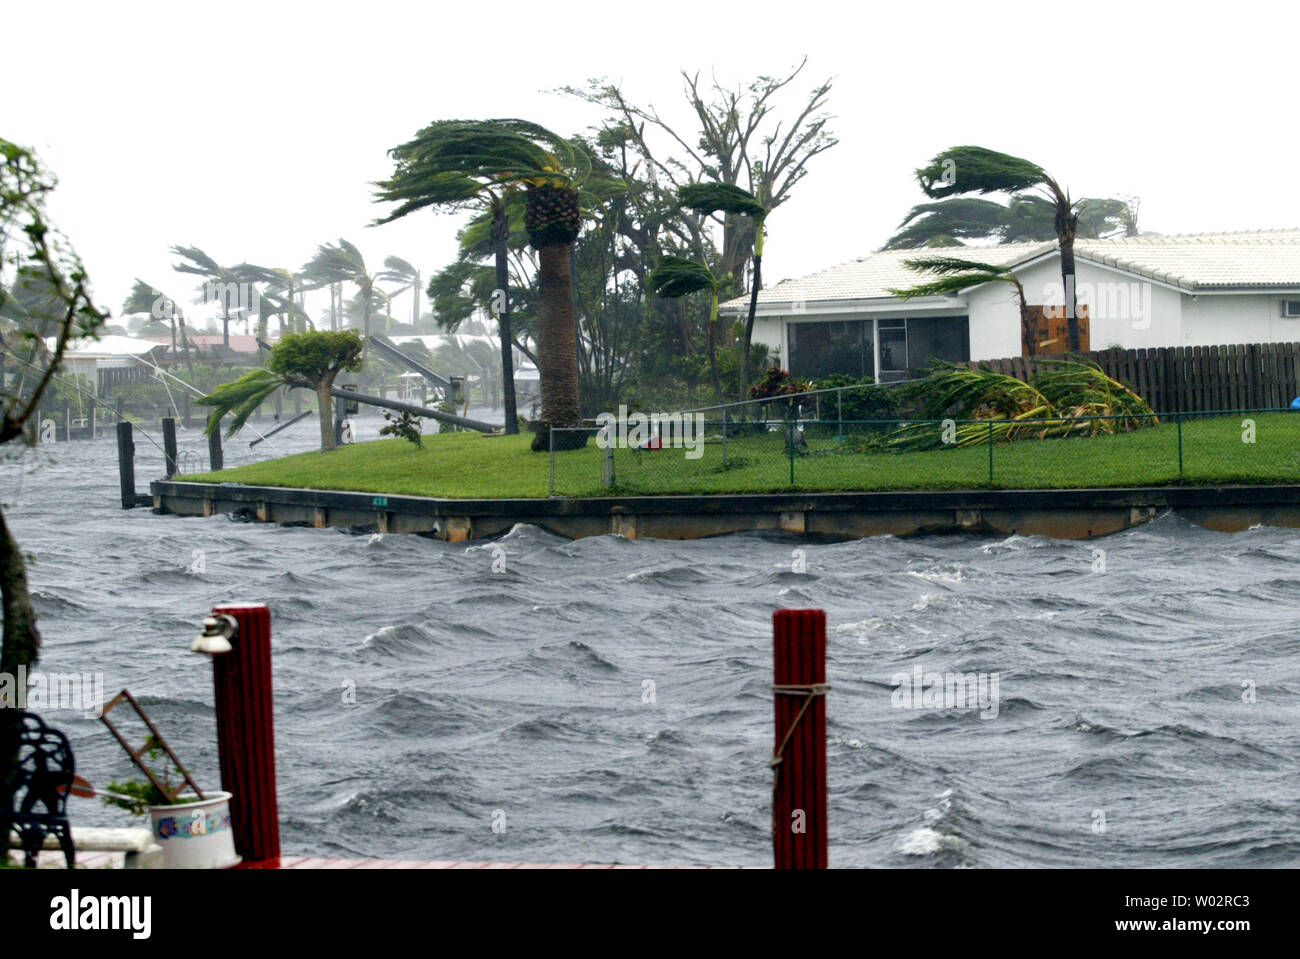 Hurricane Wilma hits south Florida October 24, 2005 with catagory 3 winds, causing widespread damage, power outages, and flooding.  (UPI Photo/Susan Knowles) Stock Photo